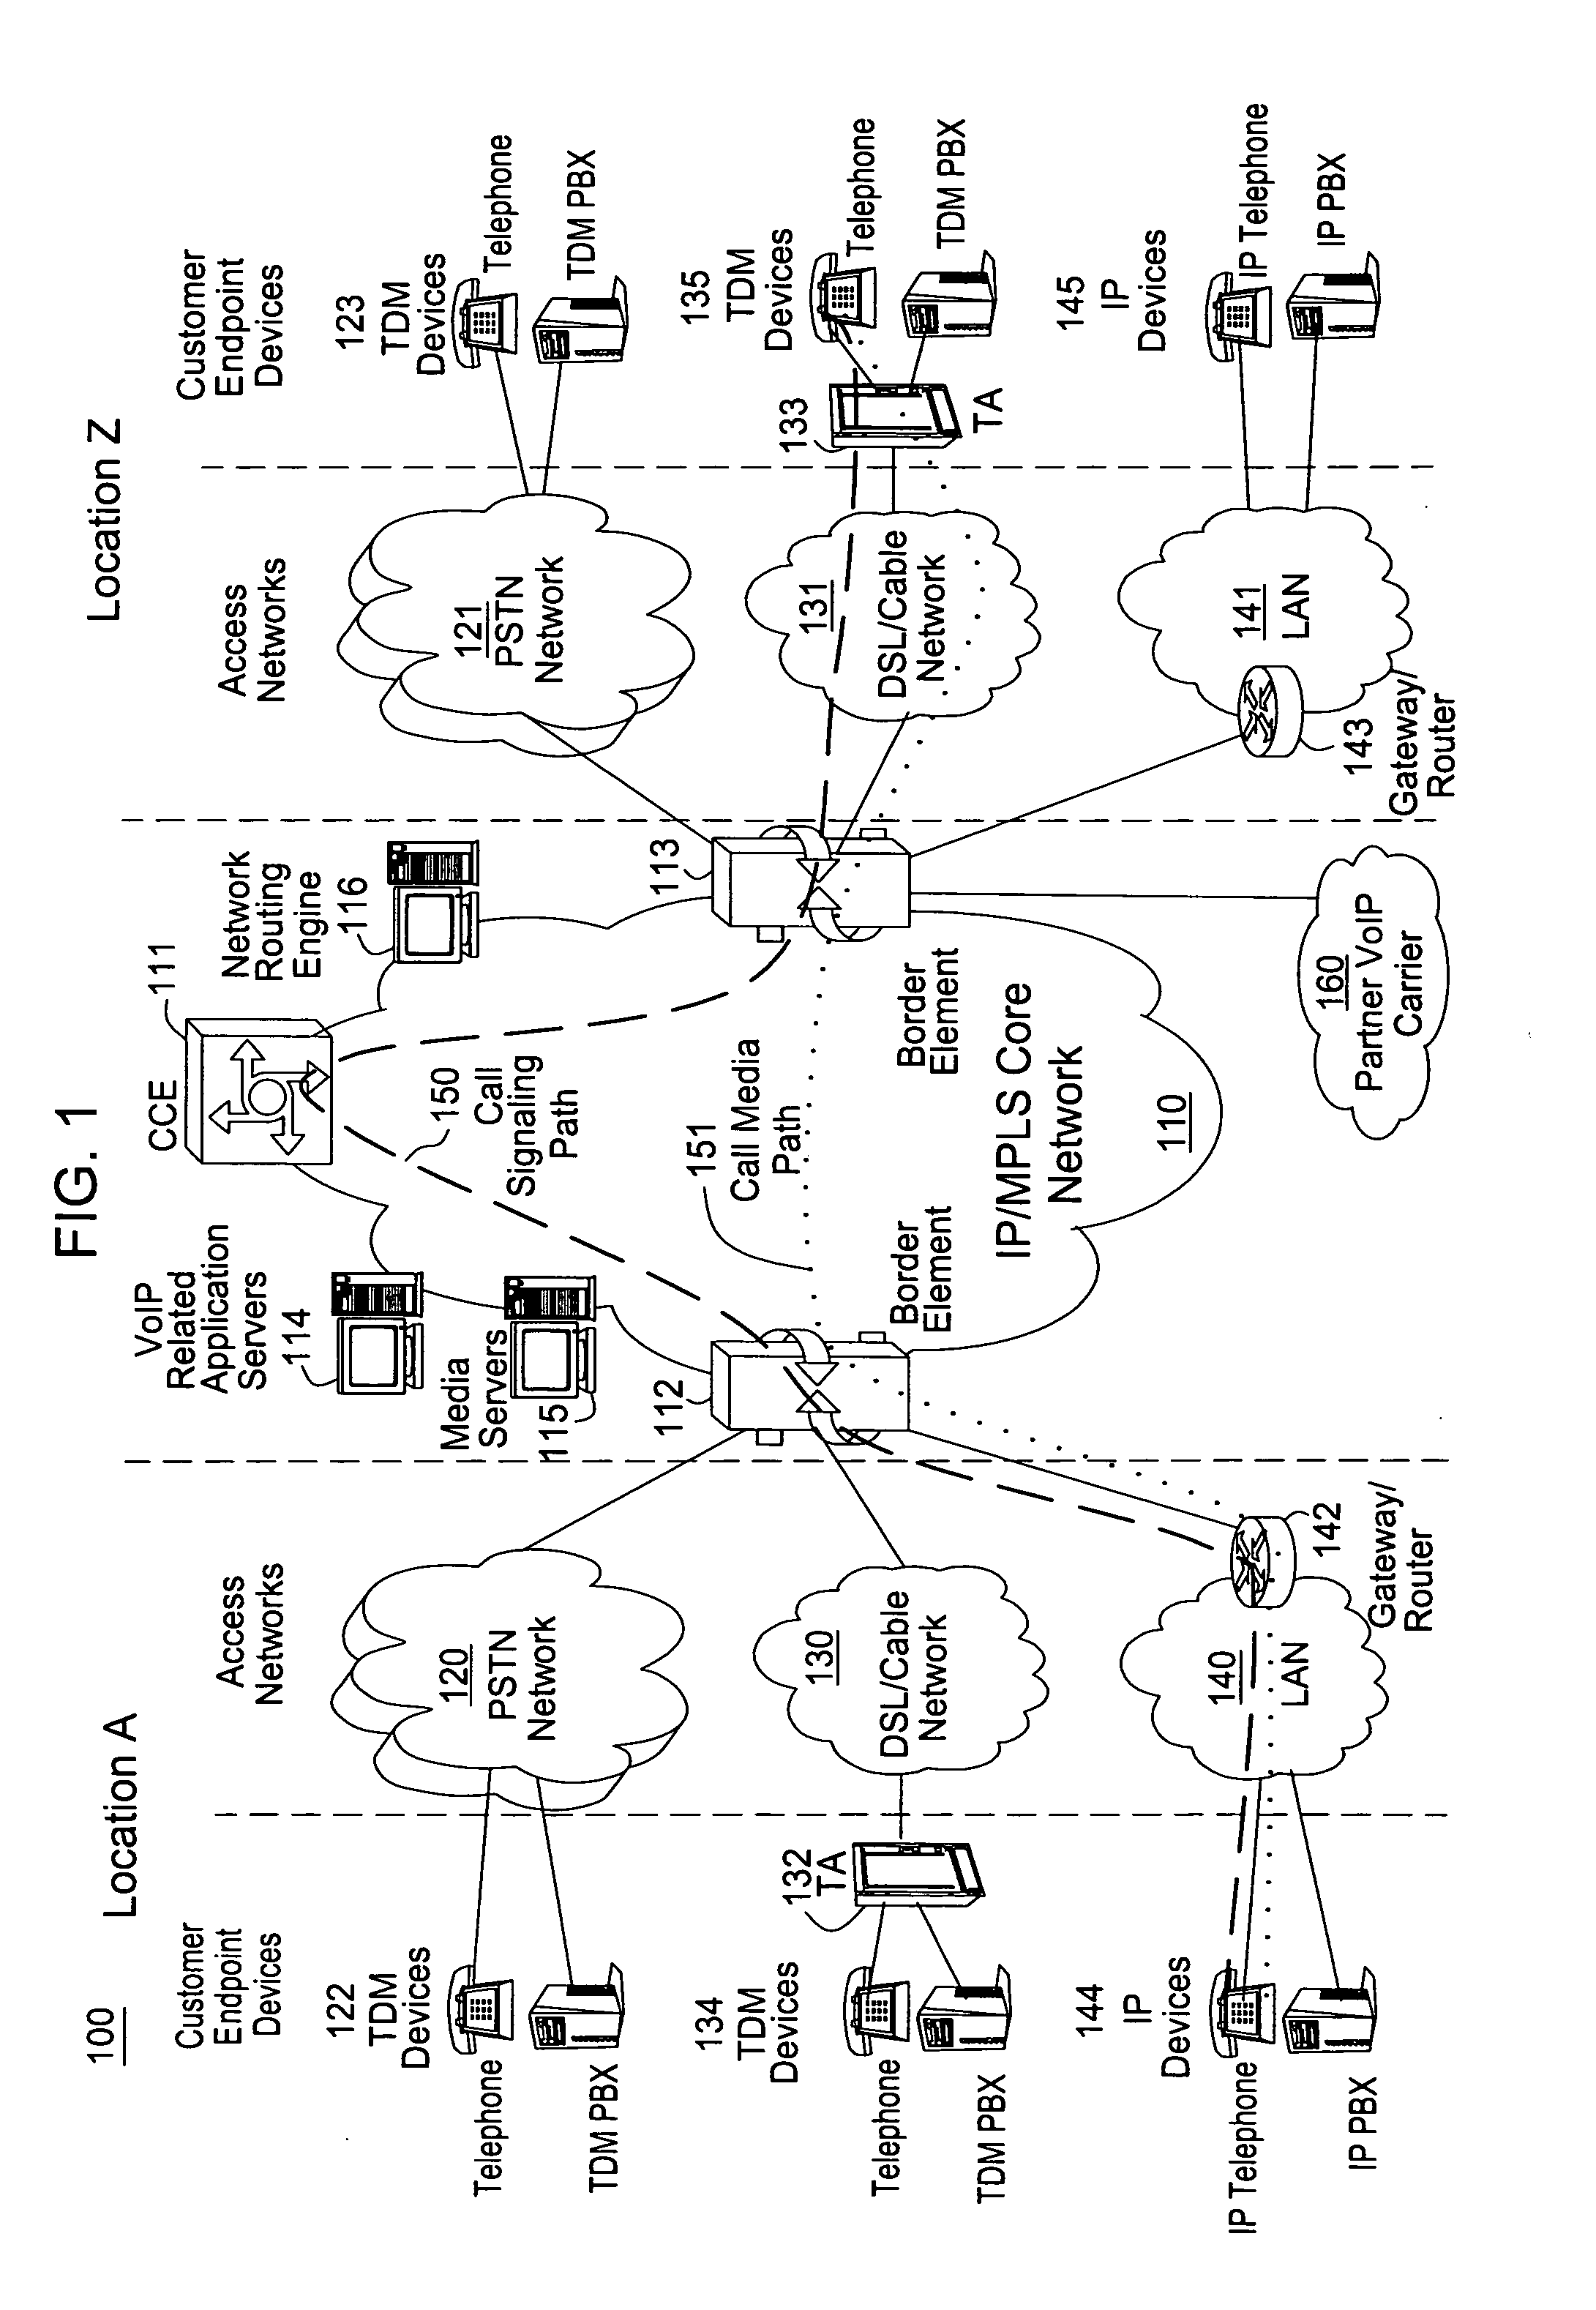 Method and apparatus for providing E911 services for nomadic users